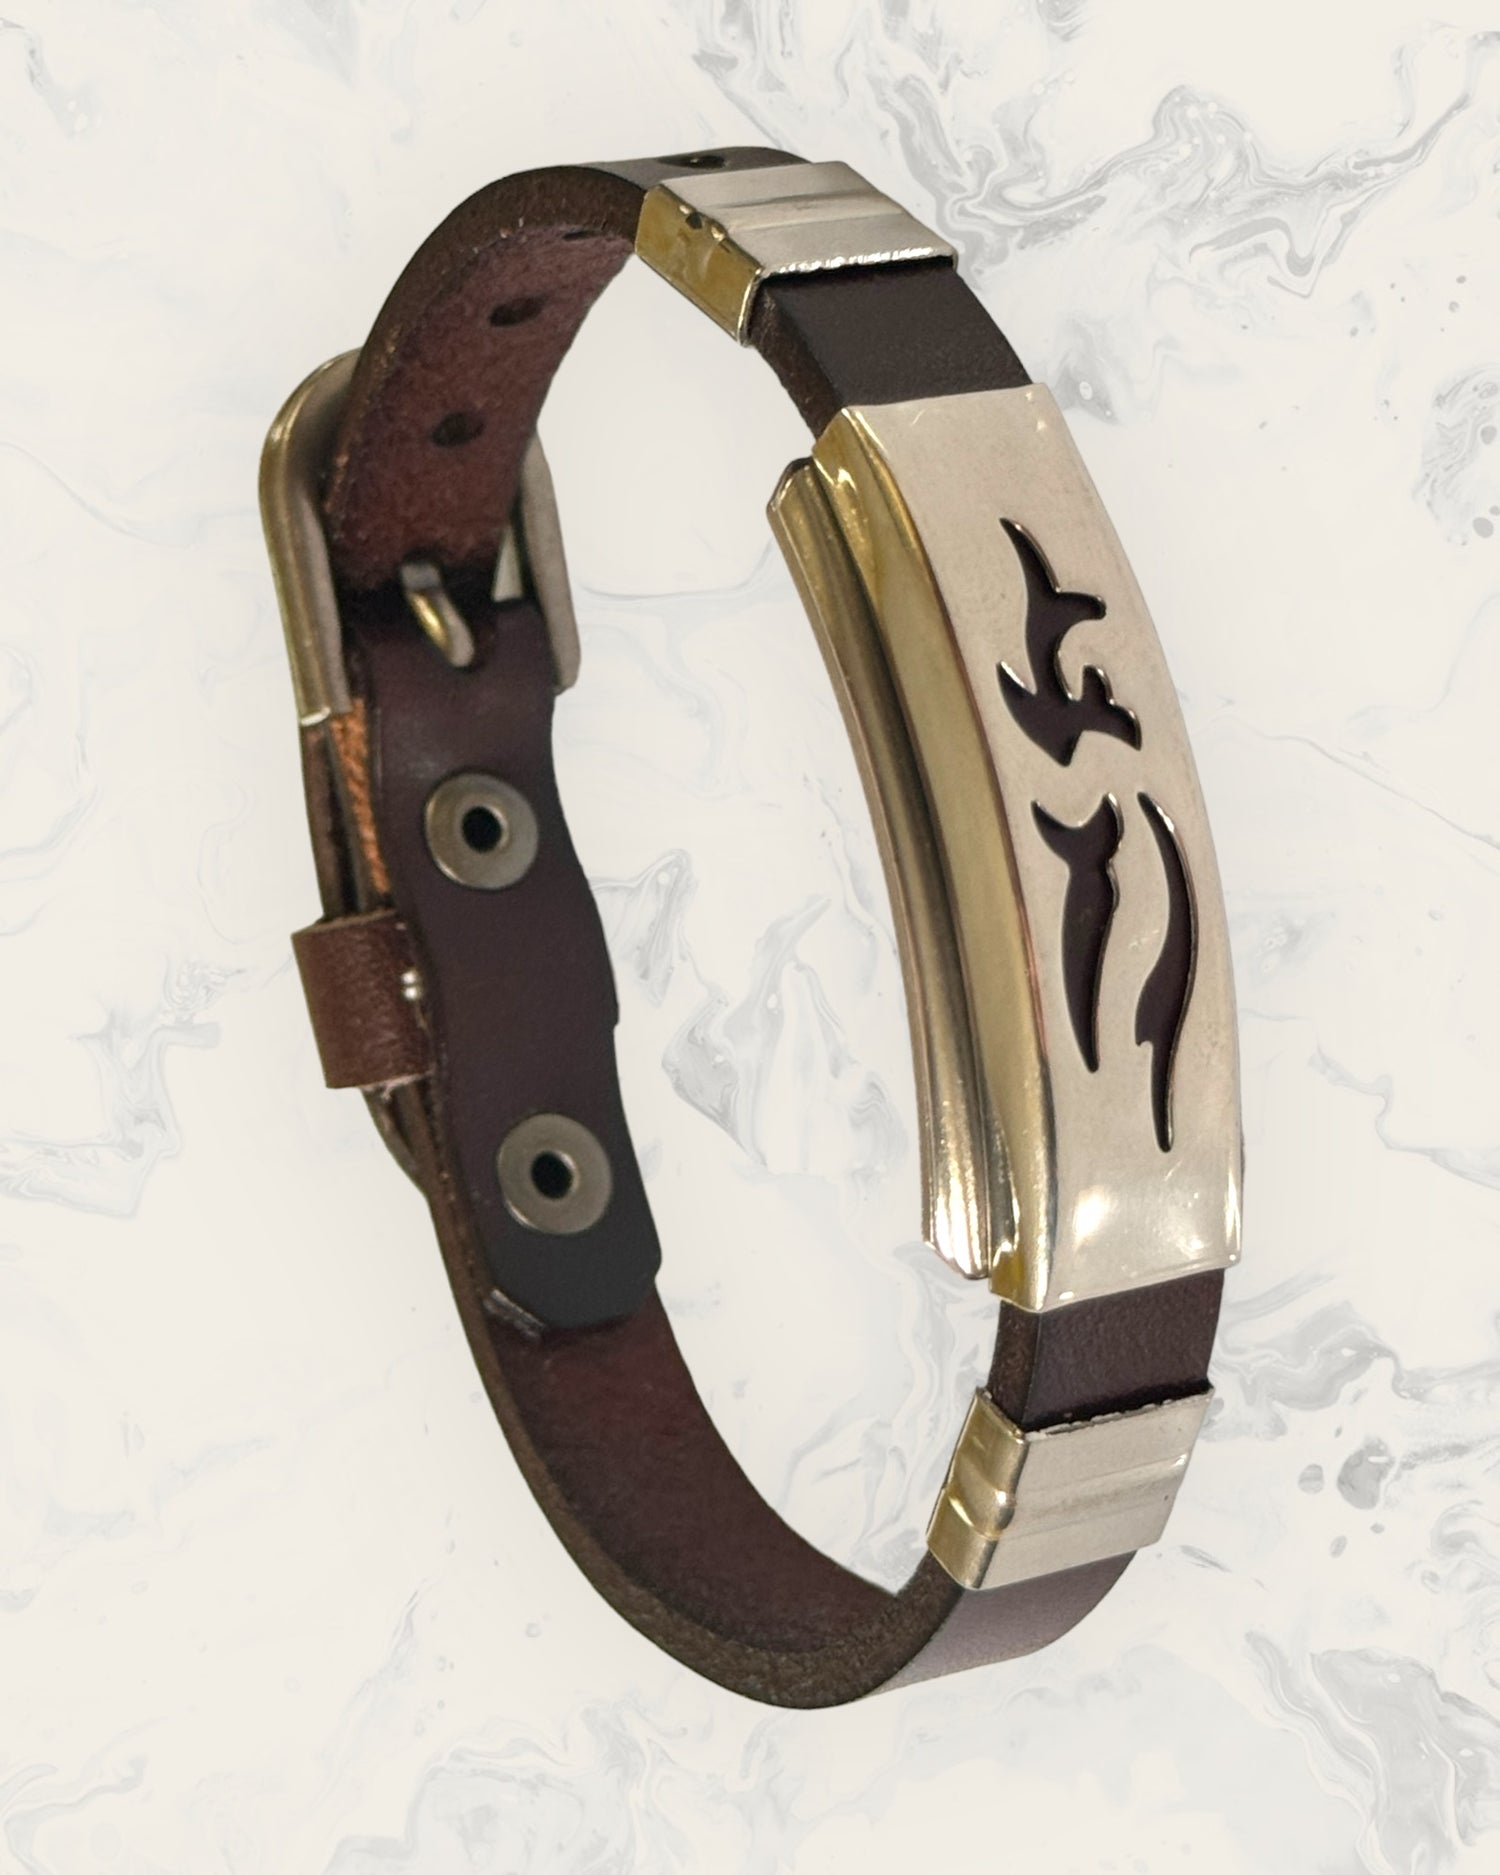 Natural Pain Relief and EMF Protection Bracelet Leather Band Color Dark Brown with Dolphin design on a silver metal slider